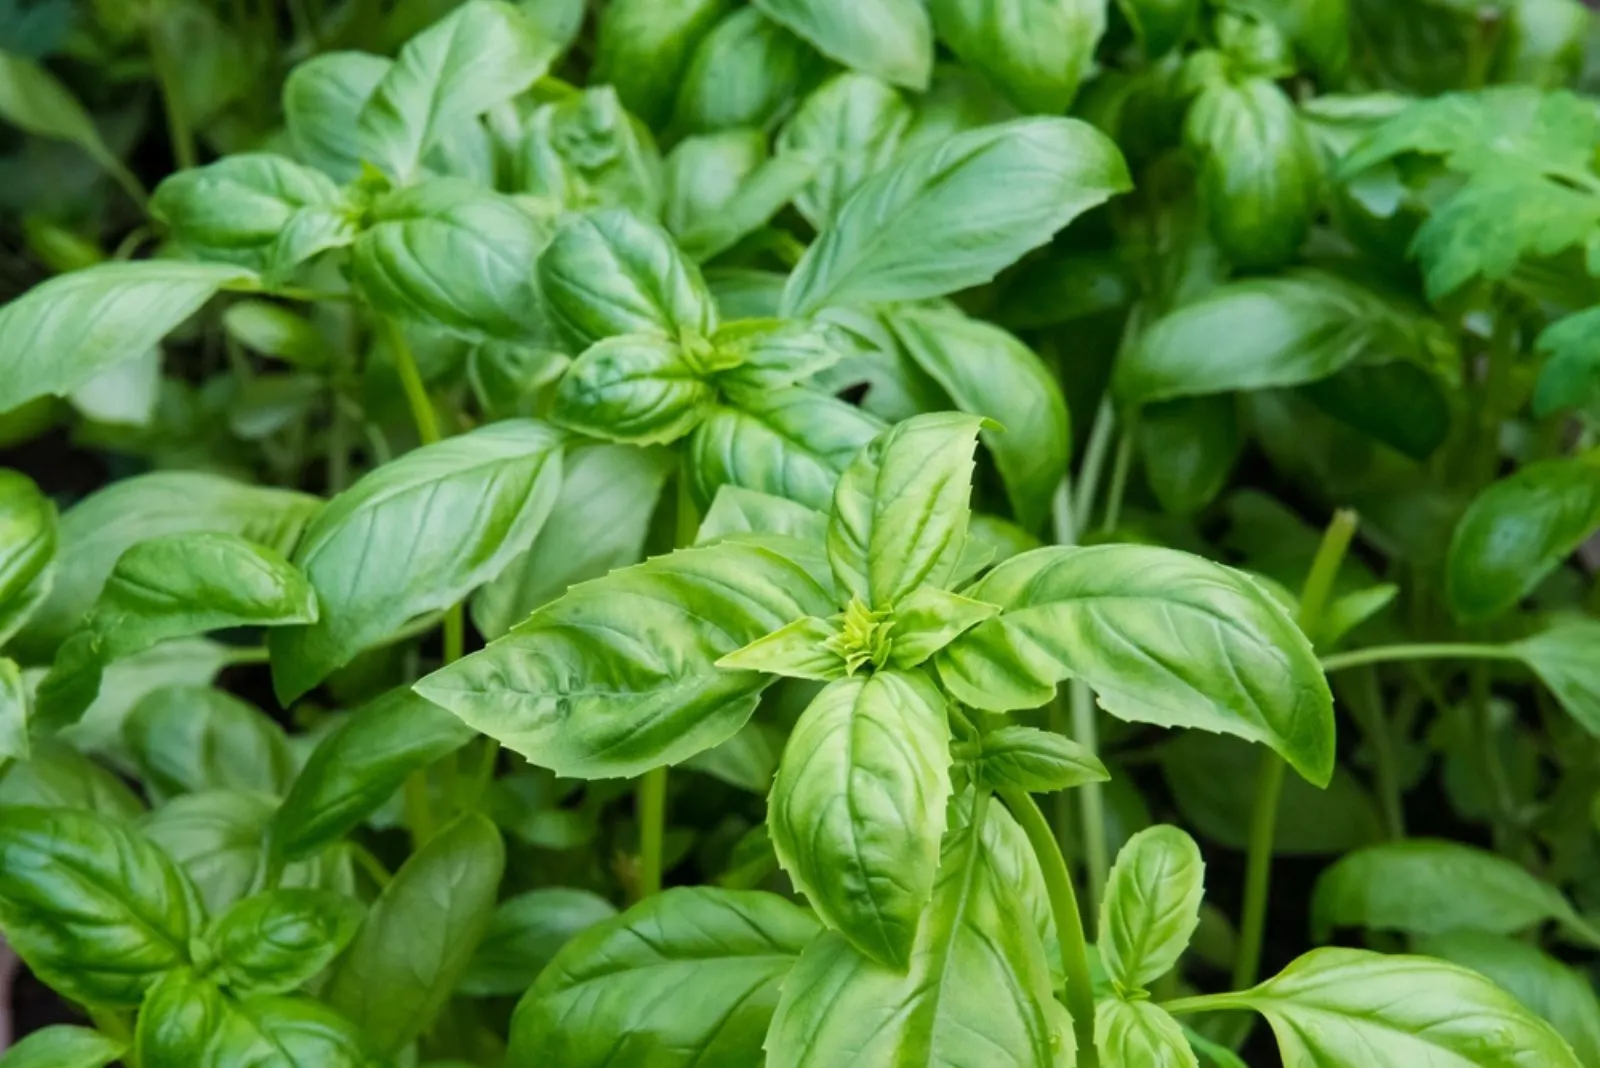 Green fresh basil leaves are available close-up on the garden bed